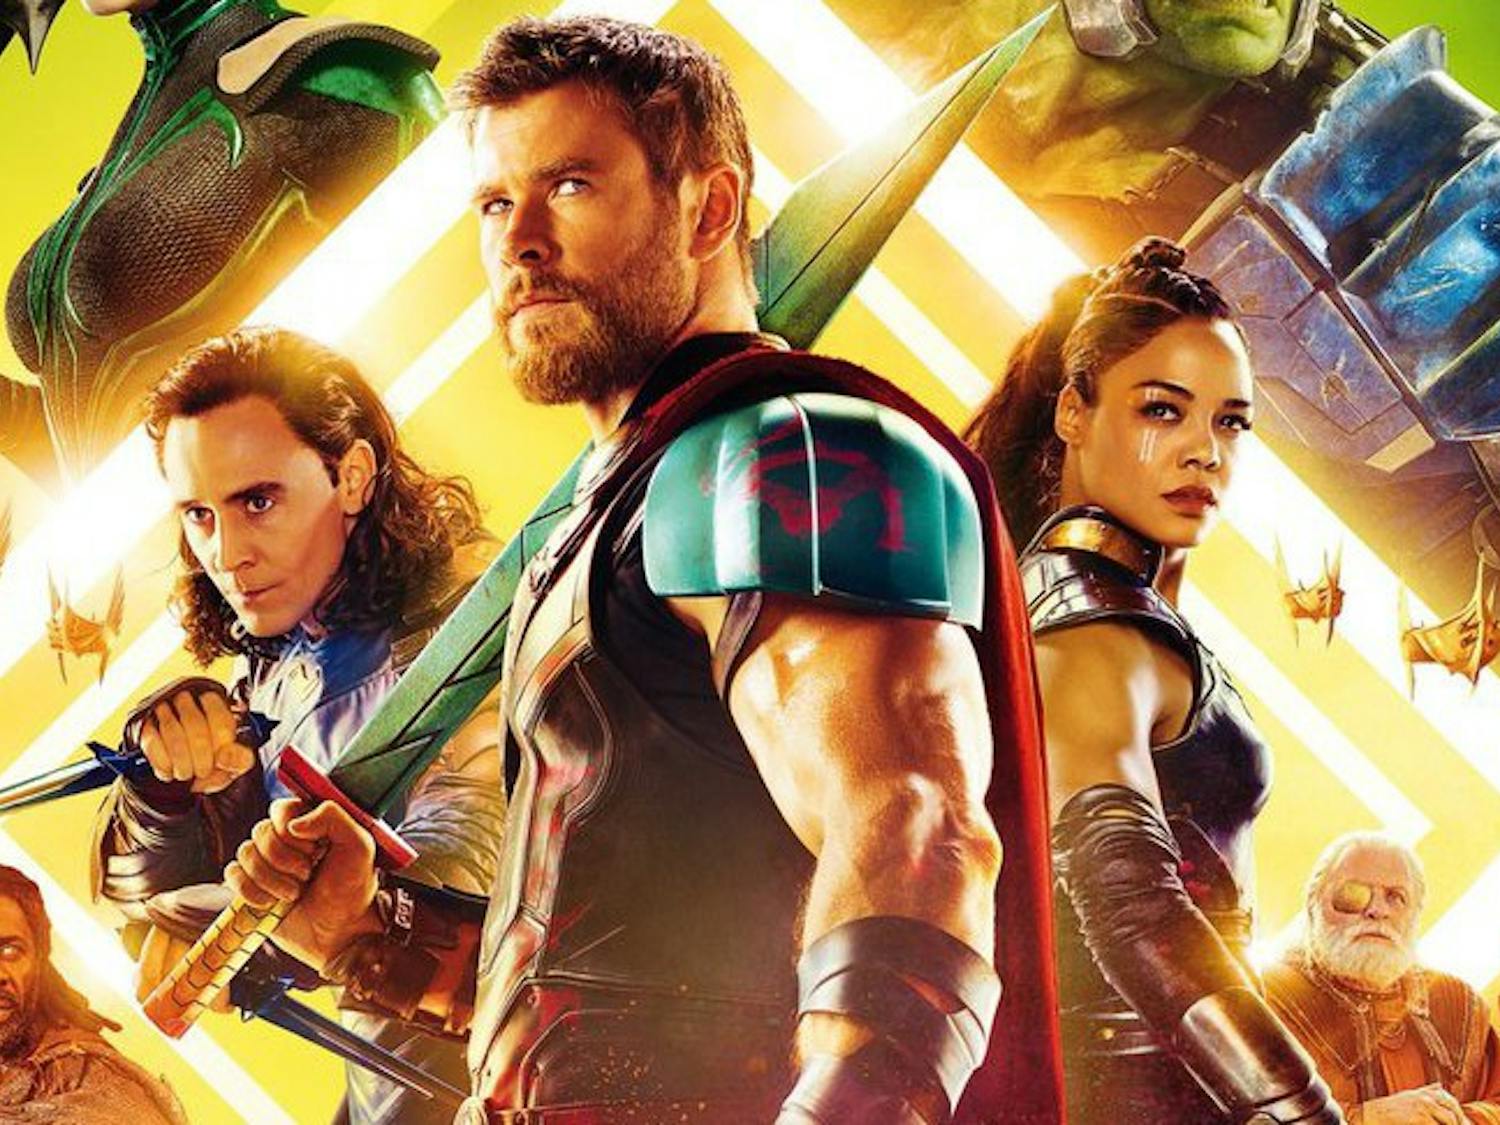 The latest “Thor” film proves to be a valuable and comedic addition to the Marvel Studios franchise.